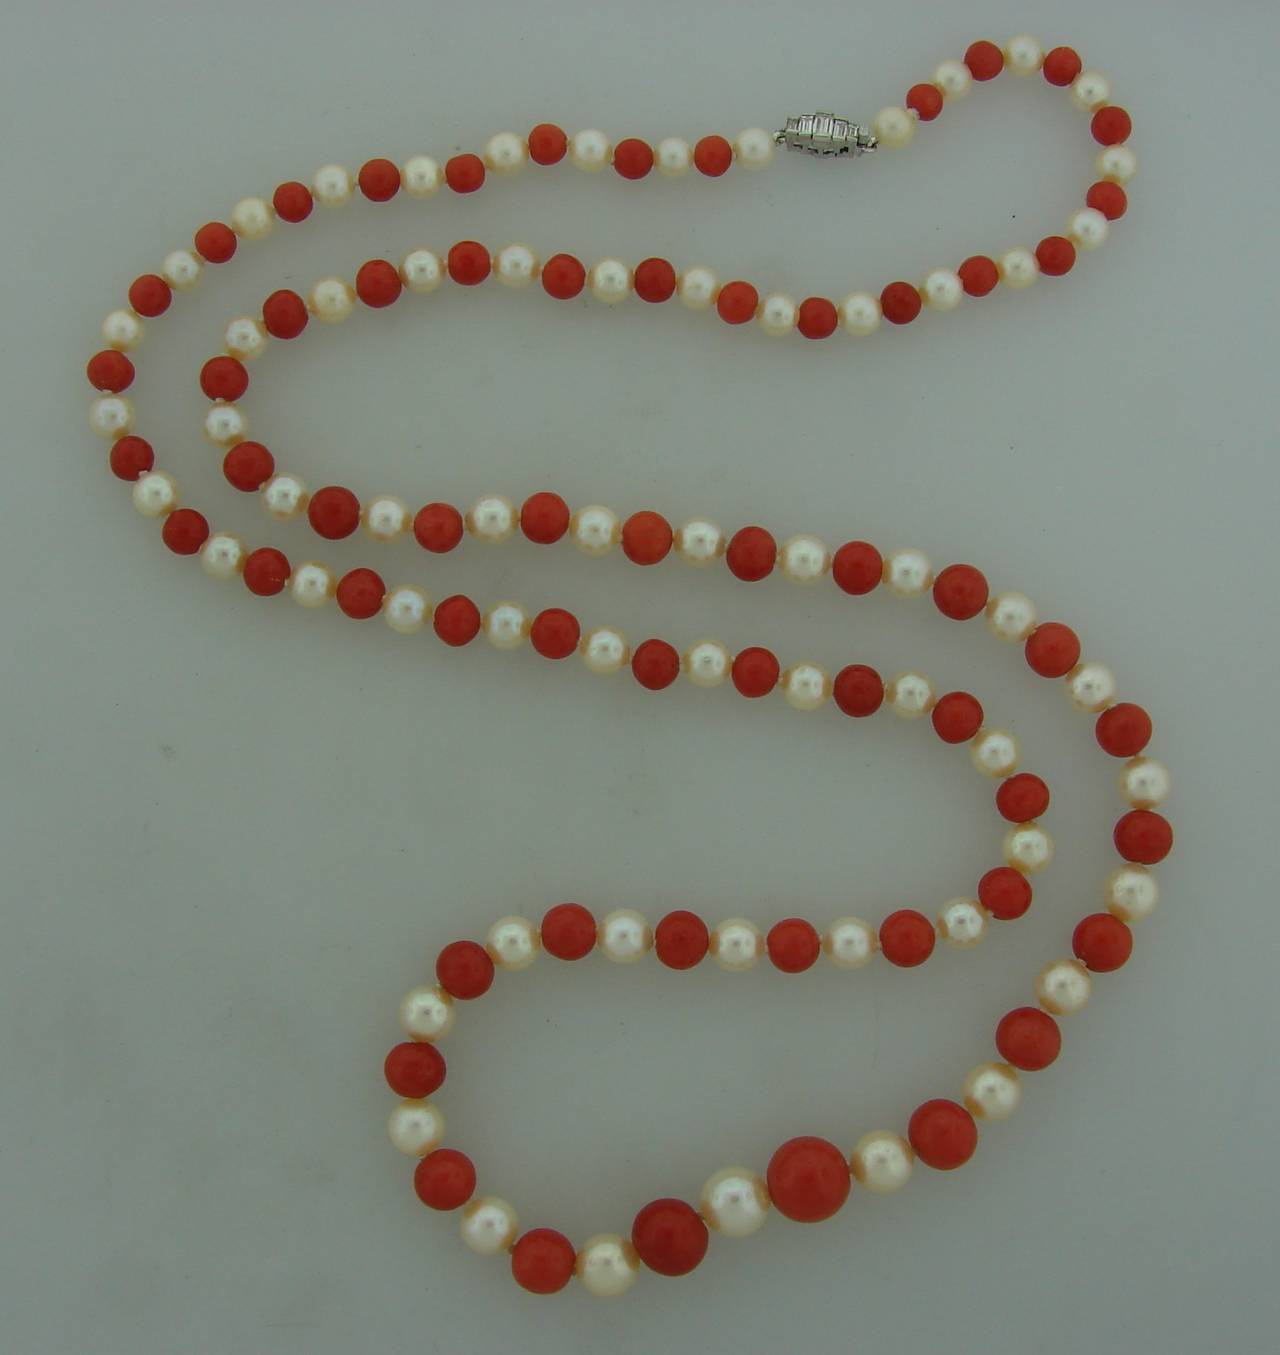 Elegant and classy bead necklace created by Buccellati in Italy in the 1980s. Features sixty one Mediterranean coral beads alternating with sixty two Akoya pearls and culminating with a beautiful white gold and diamond clasp. The pearls are around 7